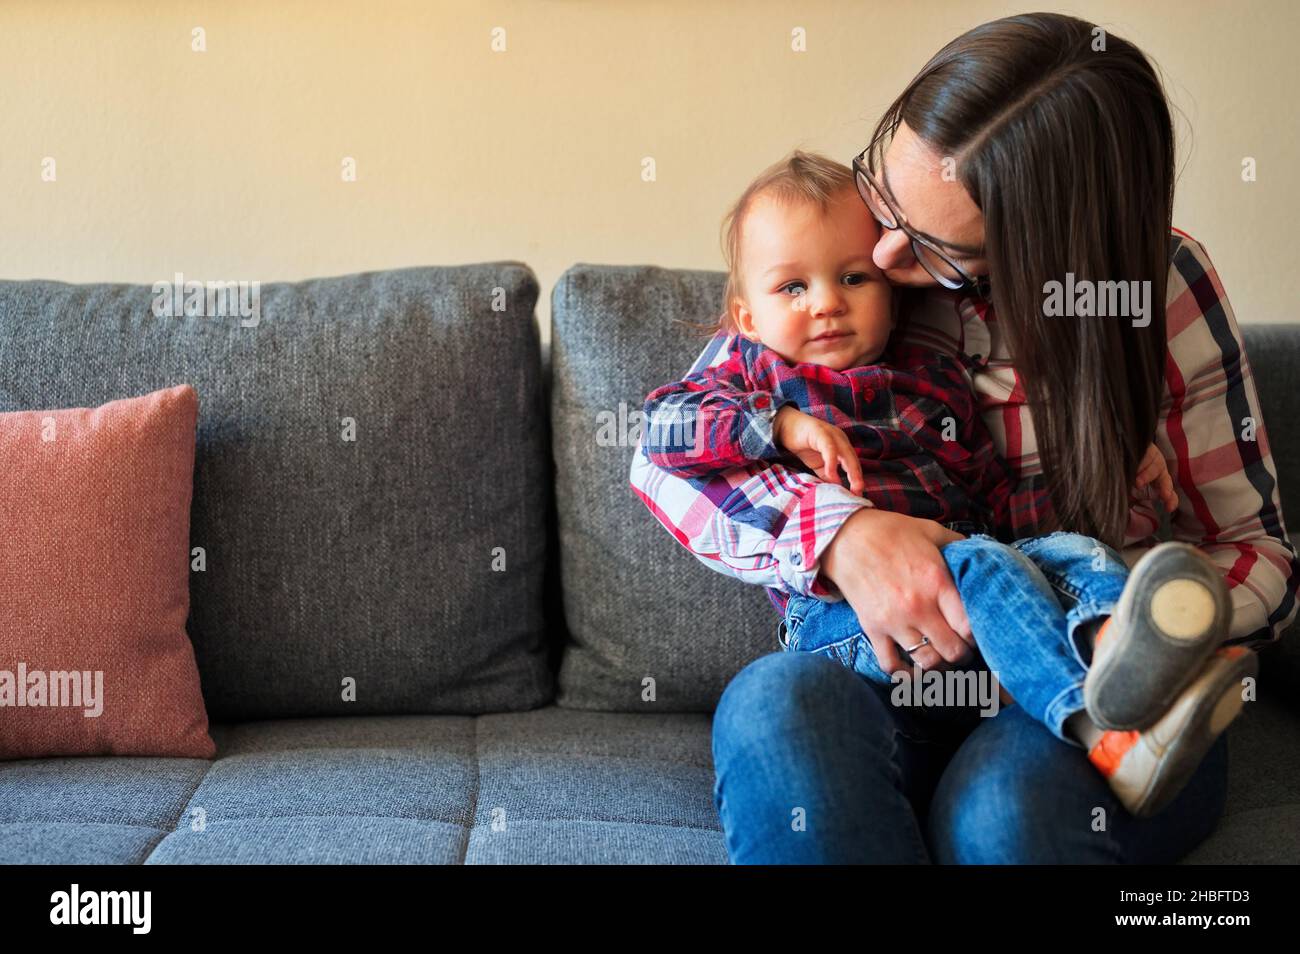 https://c8.alamy.com/comp/2HBFTD3/cute-little-boy-sitting-in-his-mother-lap-on-a-sofa-2HBFTD3.jpg